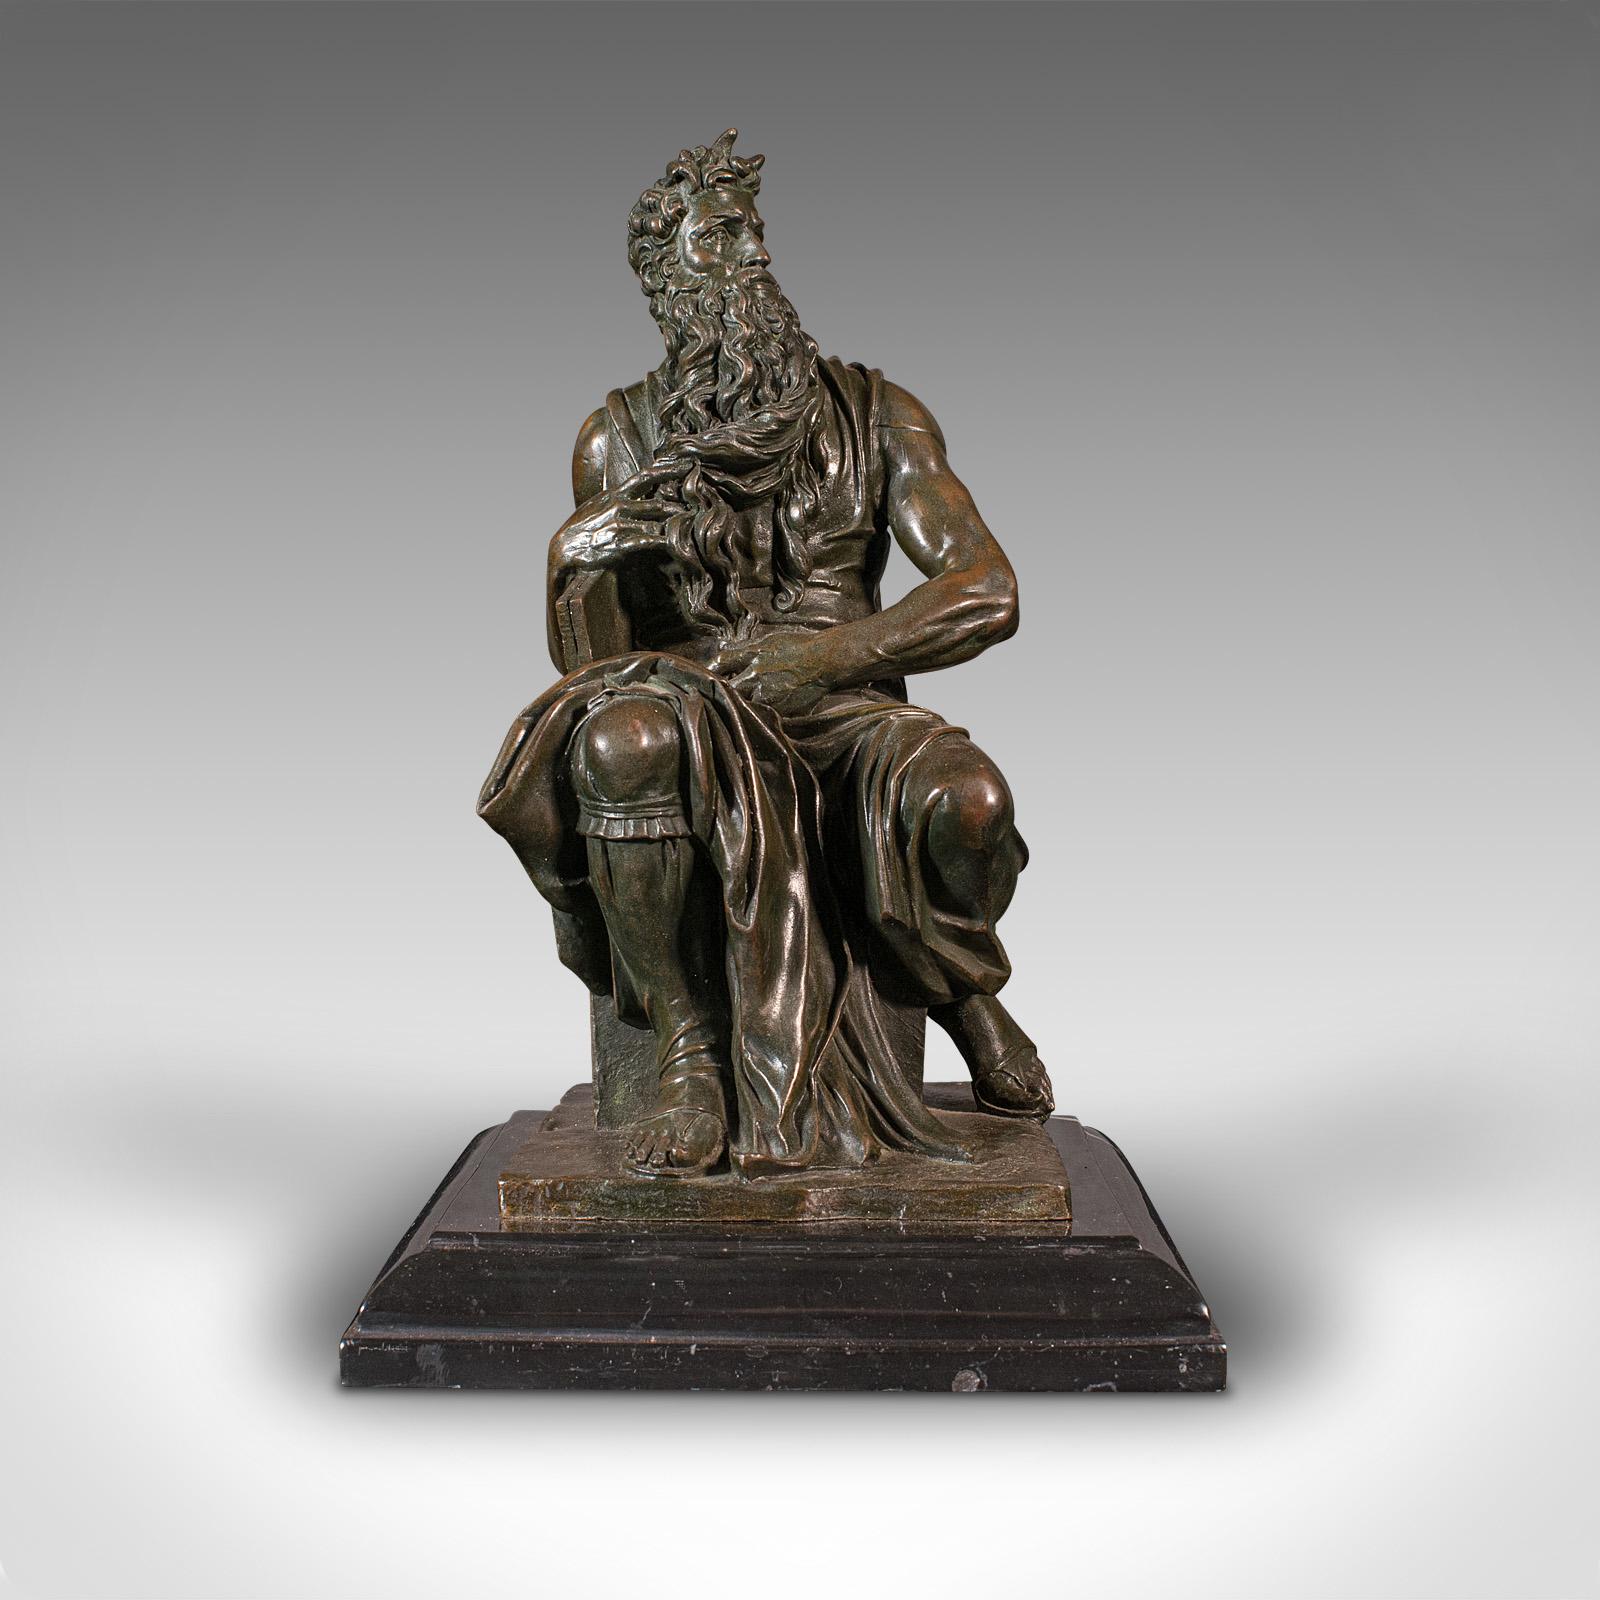 This is a vintage decorative figure of Moses. An English, bronze and marble statue after Michelangelo, dating to the mid 20th century, circa 1960.

Striking rendition of a historic statue
Displays a desirable aged patina and in good order
Bronze